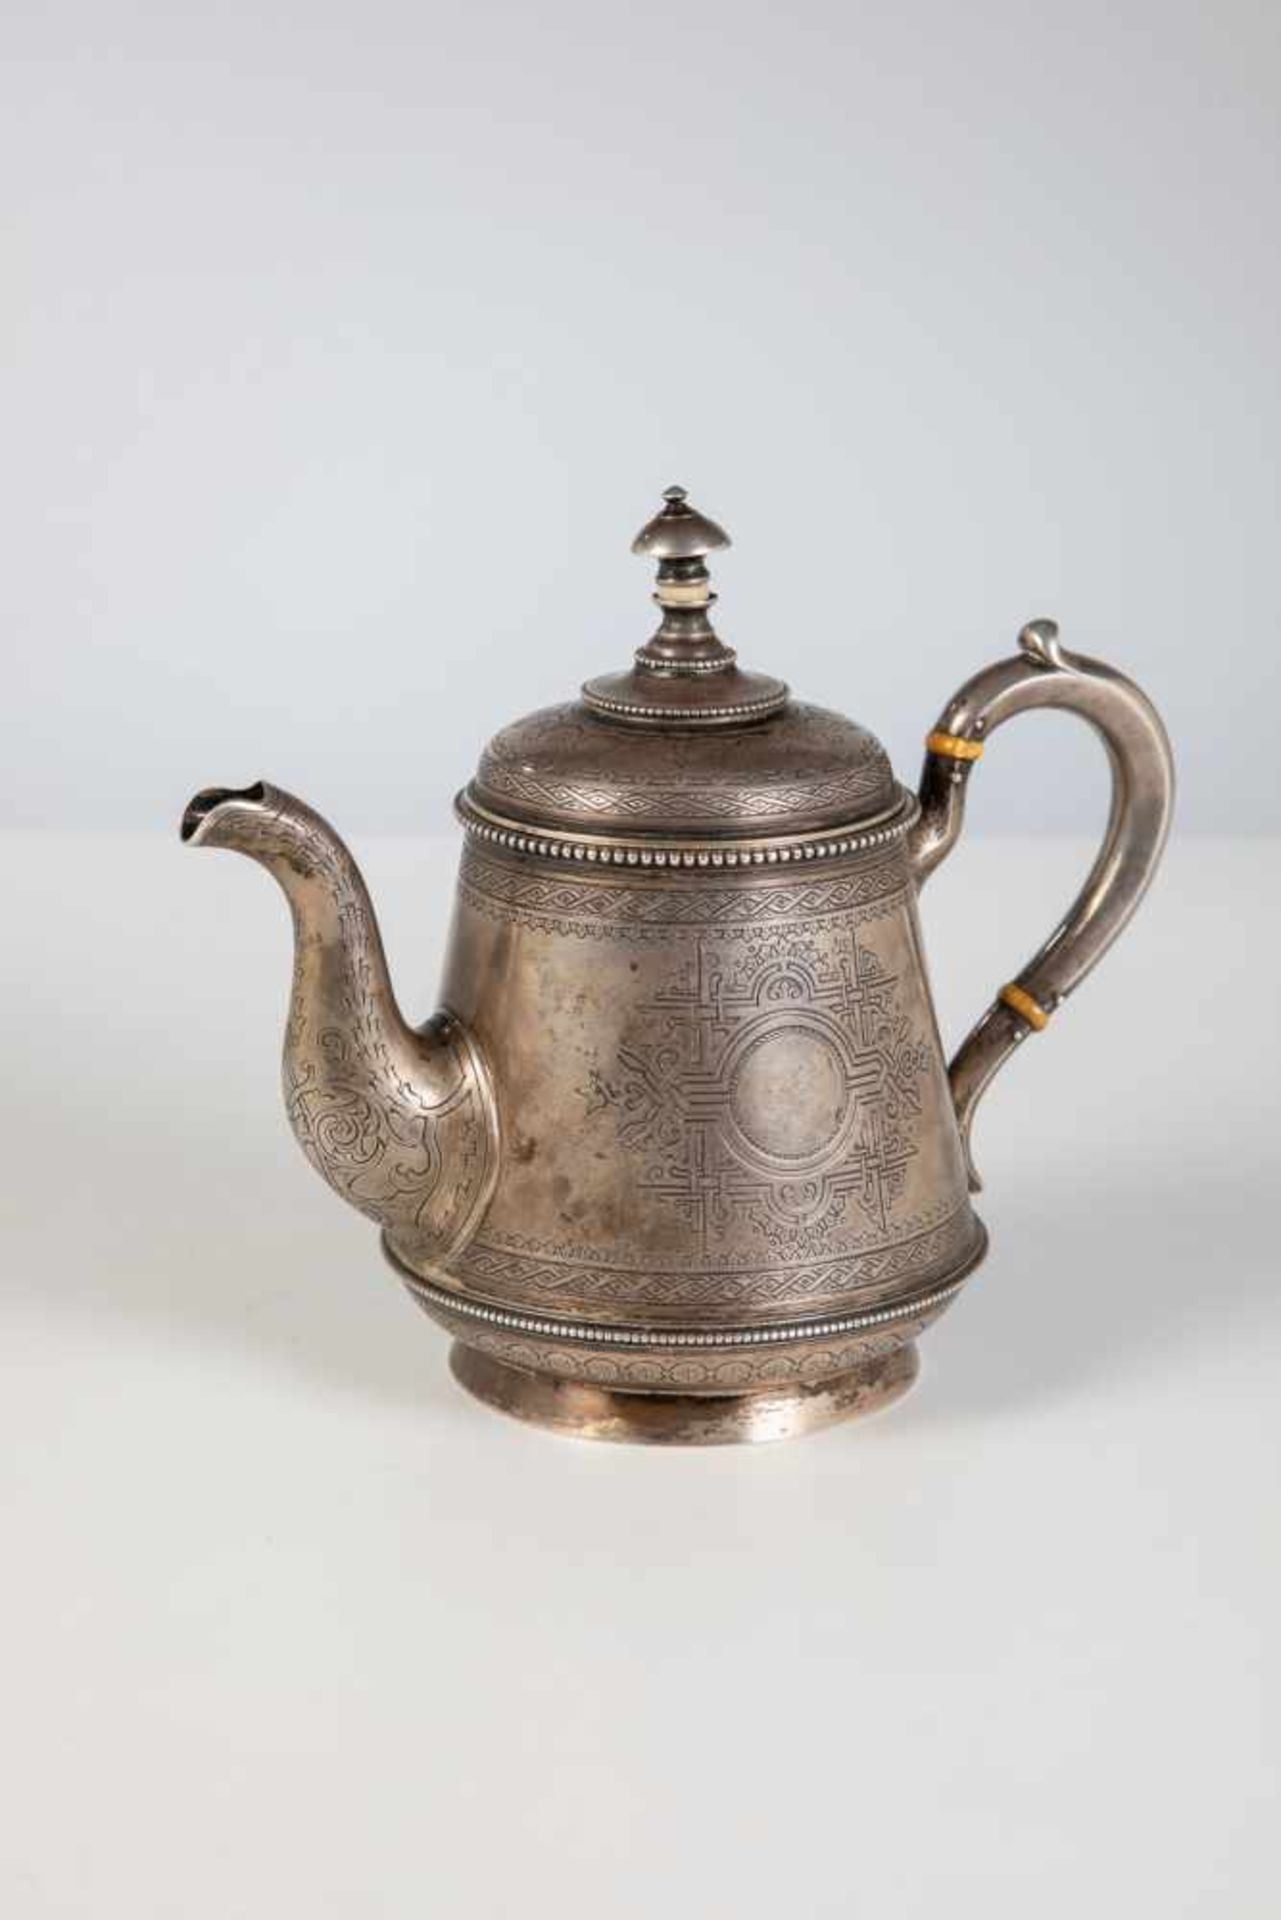 A silver teapot. Russia, Moscow, Antip Ivanovich Kuzmichev, 1889. Gilt interior. Body andlid with